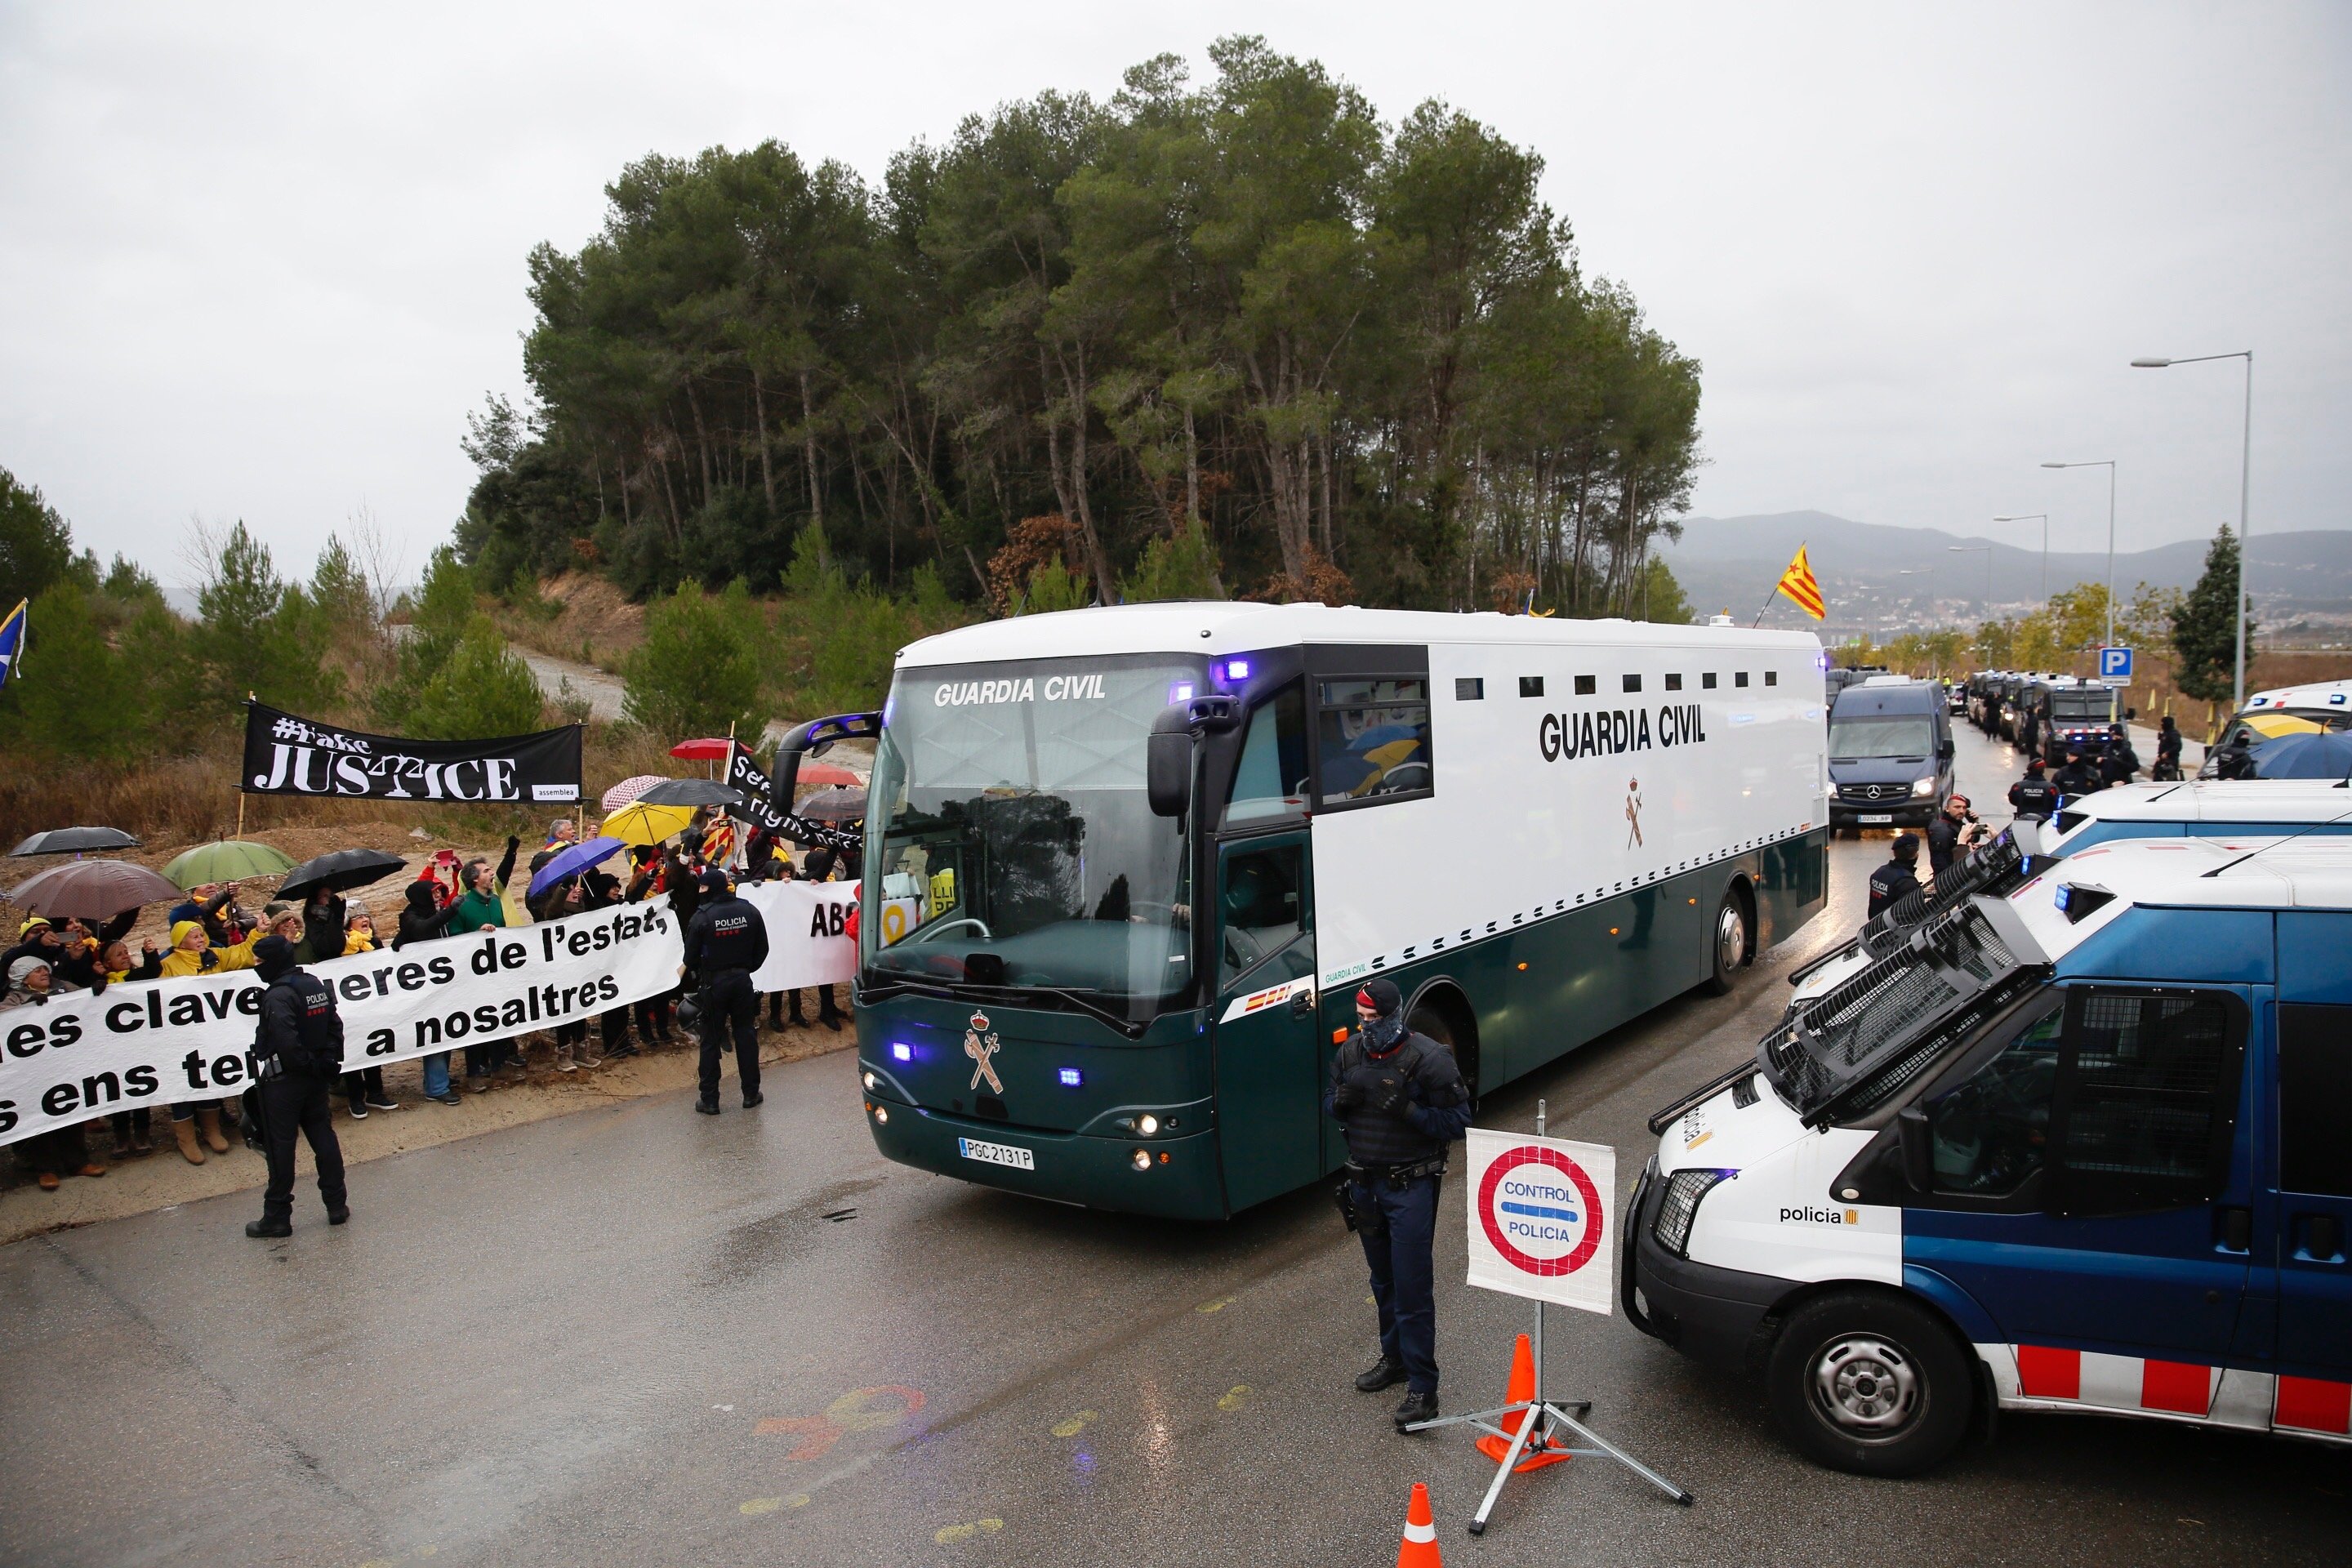 Spanish police groups defend Civil Guard officer who mocked Catalan prisoners